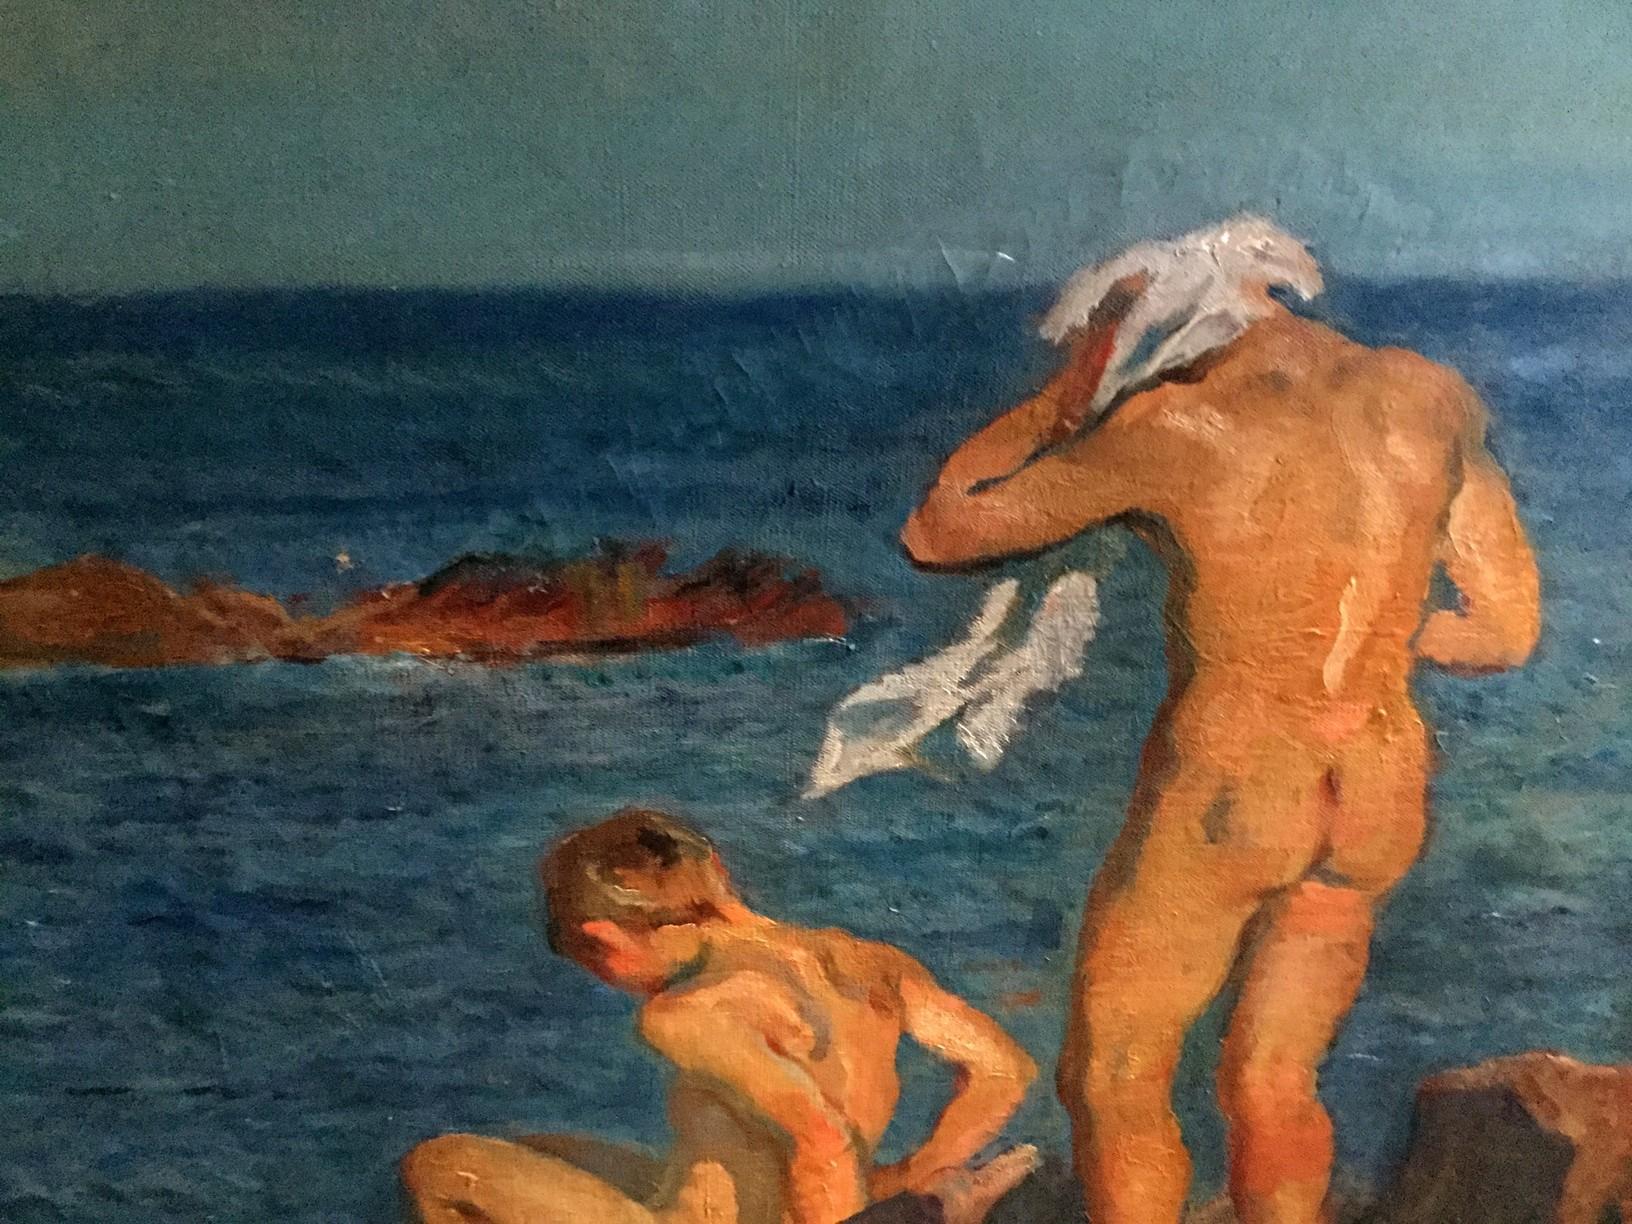 Framed August Torsleff Nude Men on Rock in Front of Water Oil on Canvas Painting For Sale 1